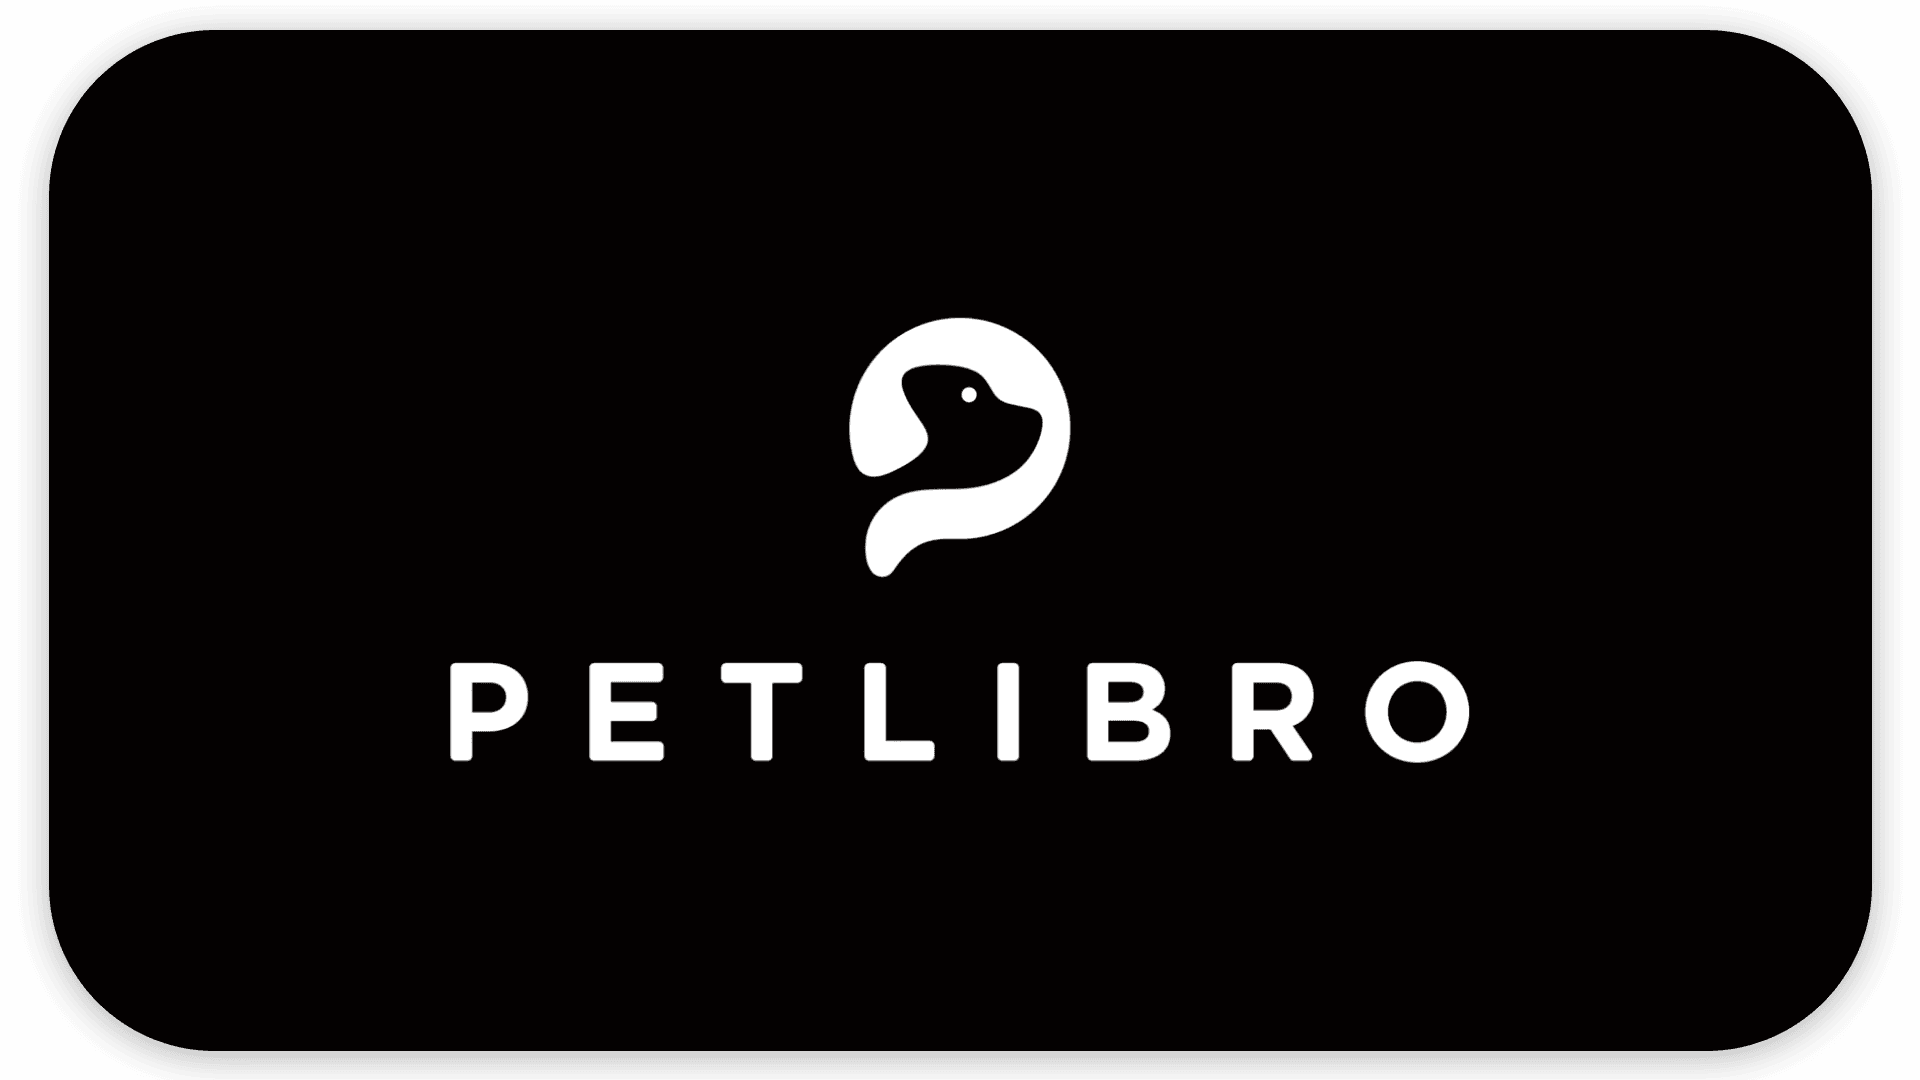 PETLIBRO logo featuring a stylized white outline of an animal's head against a black background.